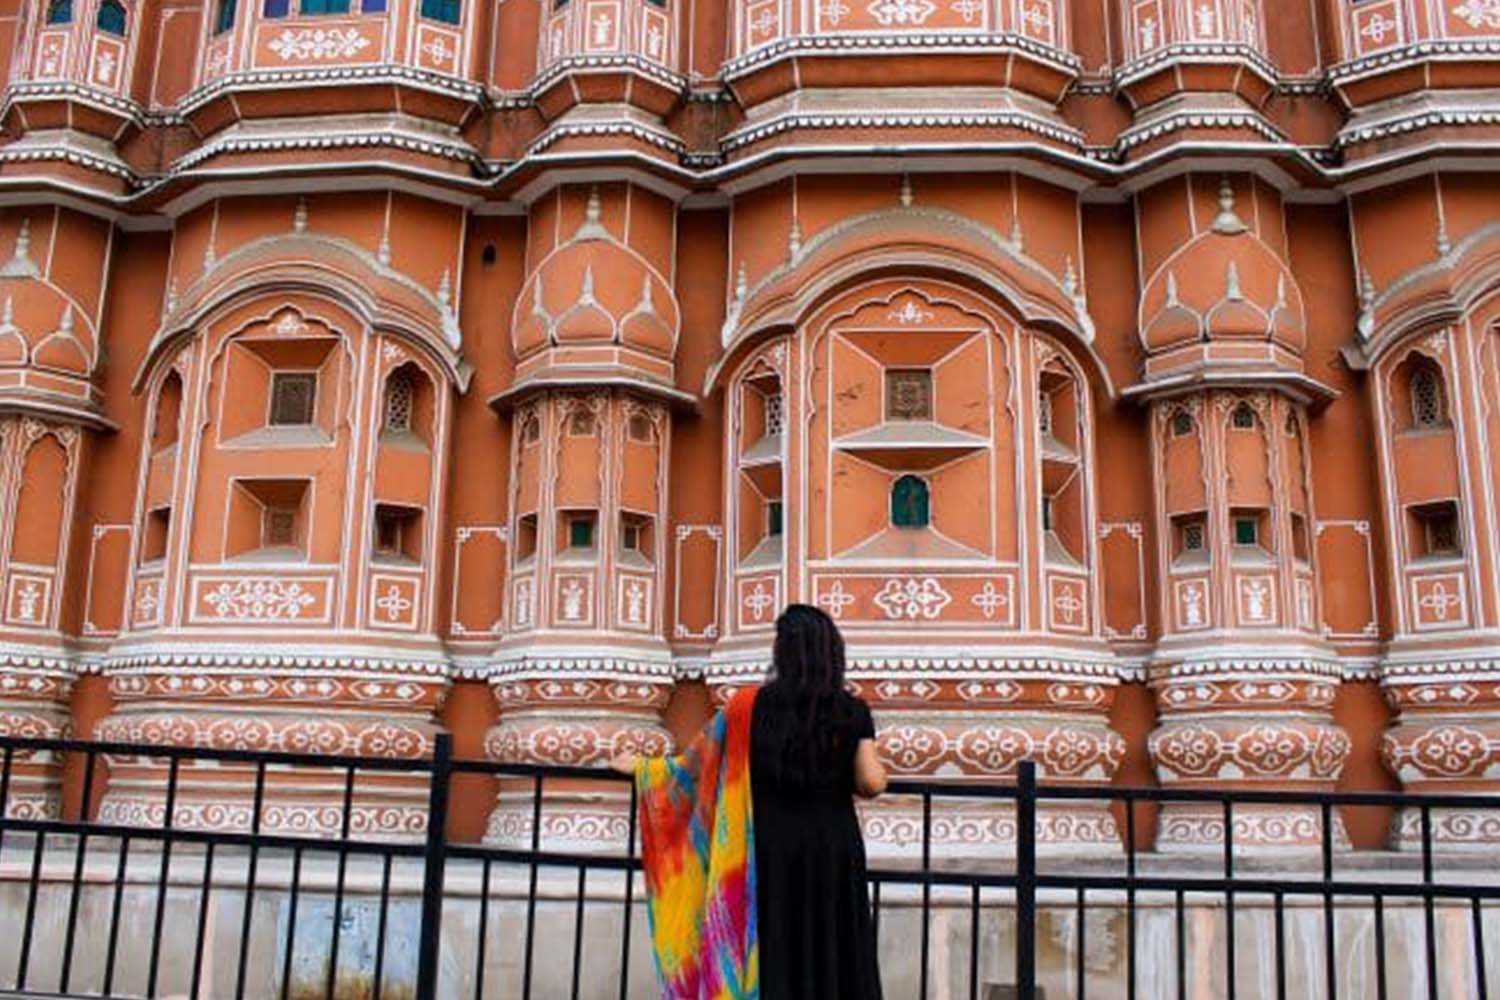 My Four Day solo trip to Jaipur